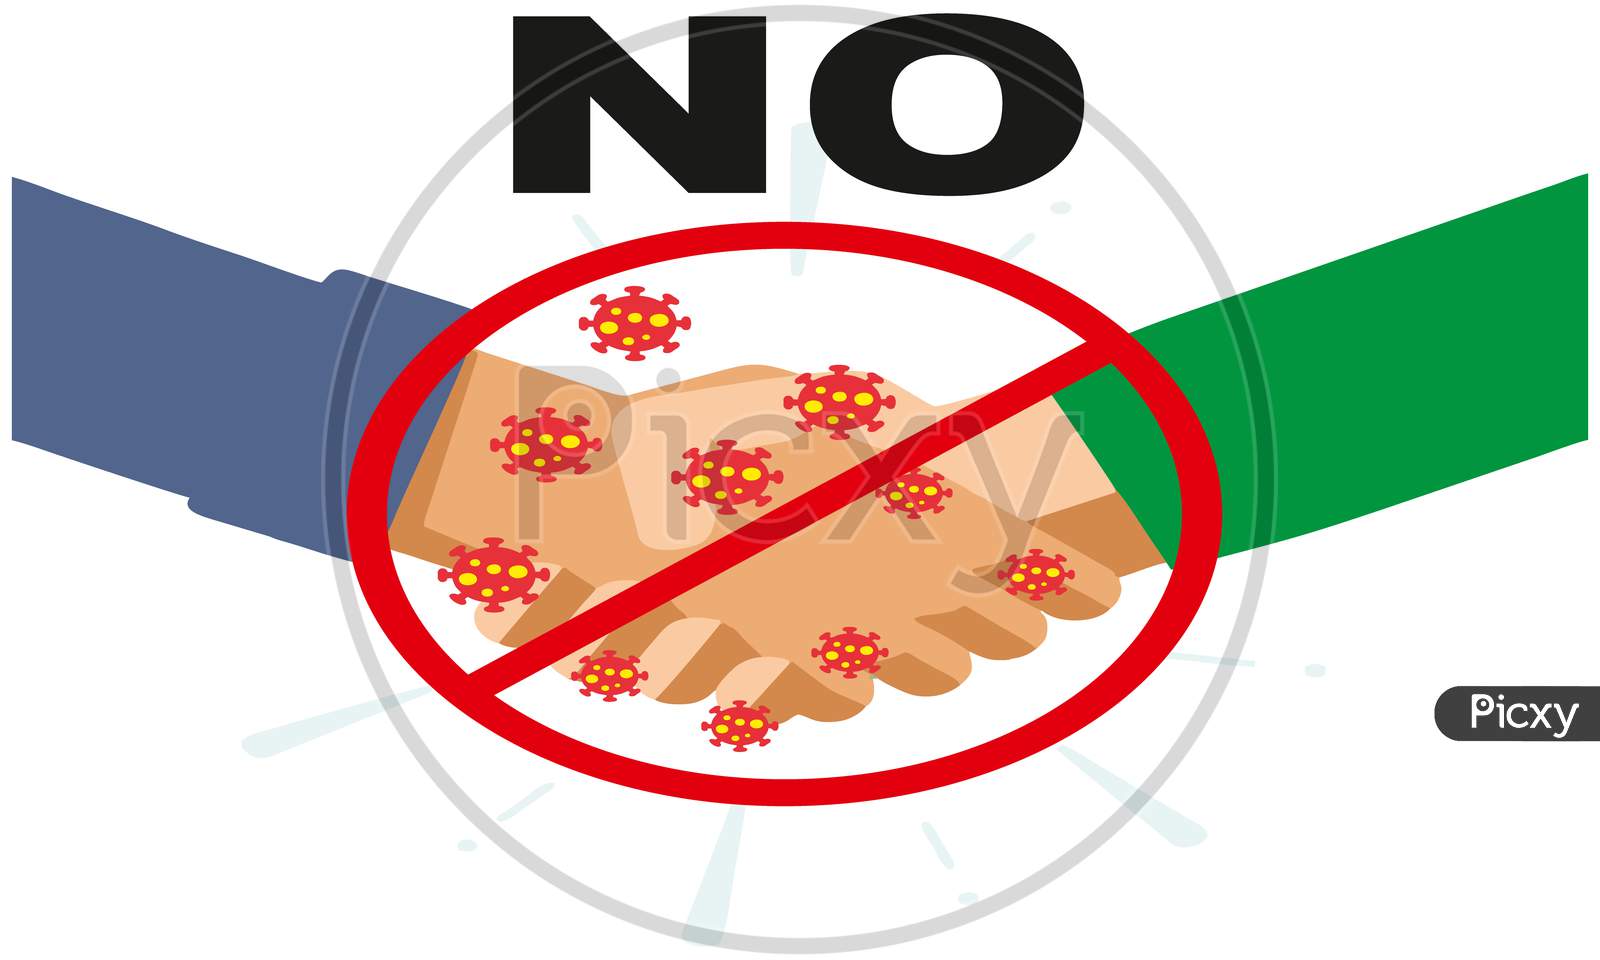 No Handshake To Avoid Spreading Germs